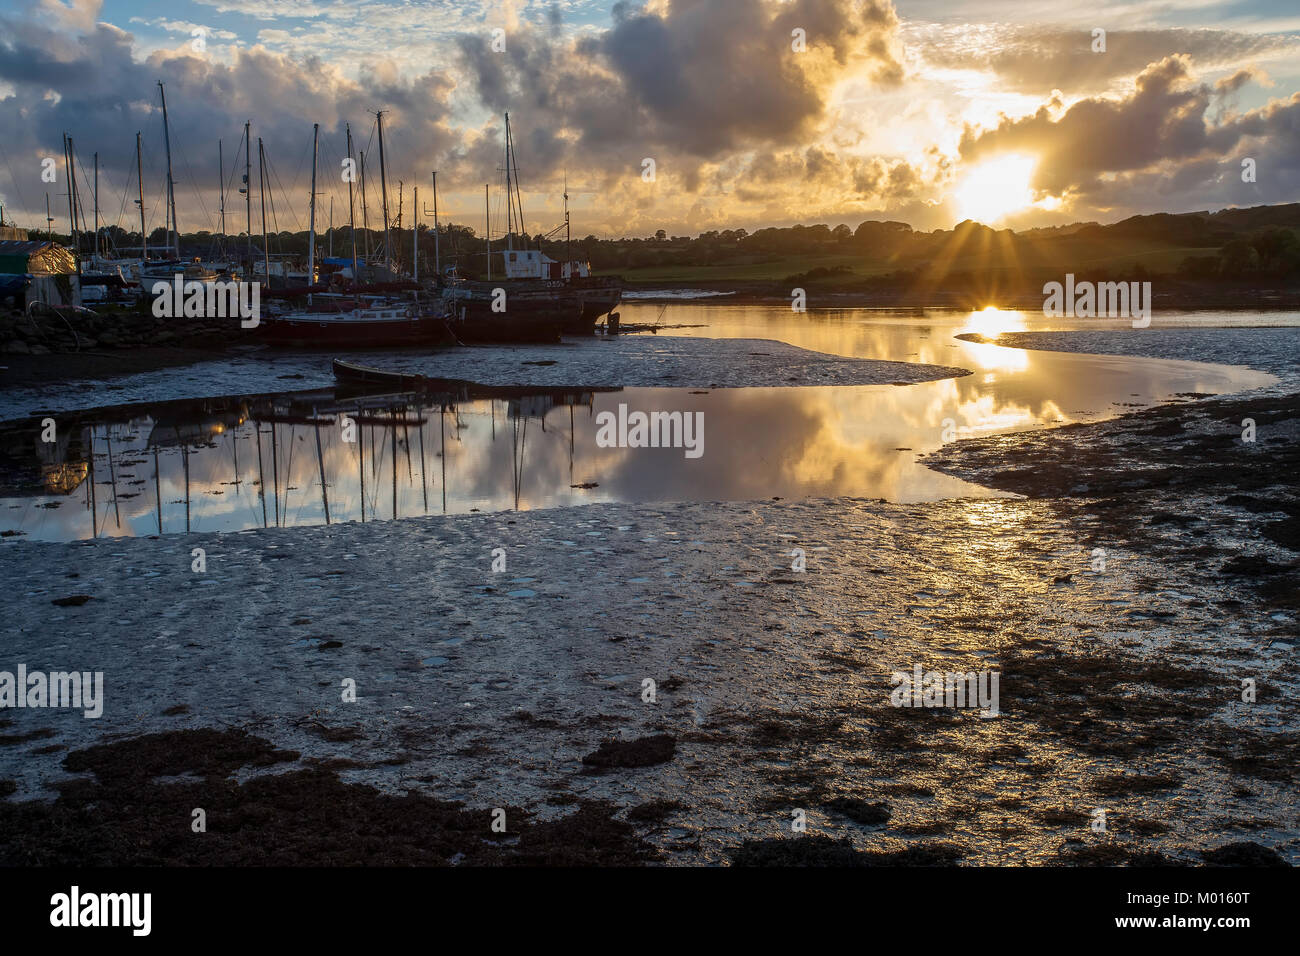 Sunset at the Boatyard in Baltimore Co Cork with beautiful reflections of the Sky in the meandering River. Stock Photo